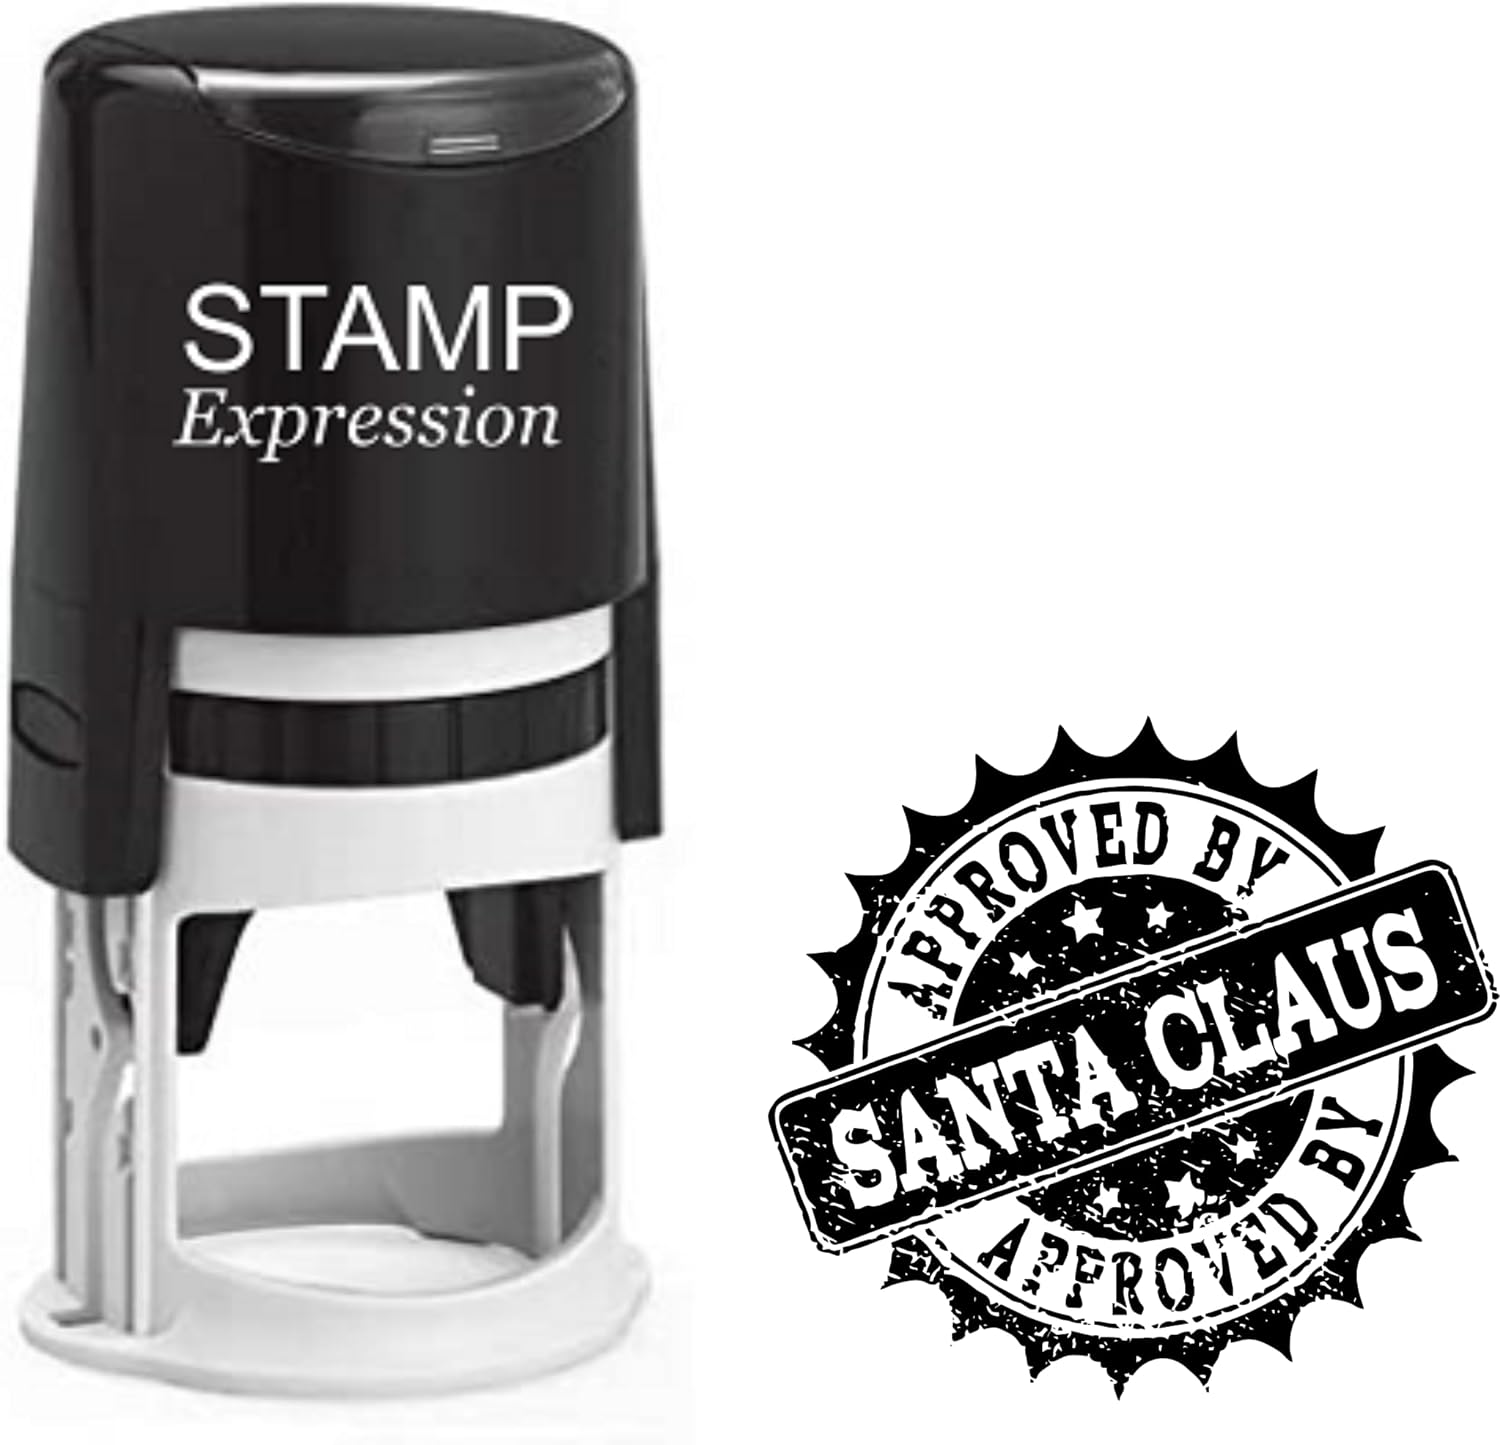 Approved by Santa Claus Rustic Christmas Stamp (SH-76250)